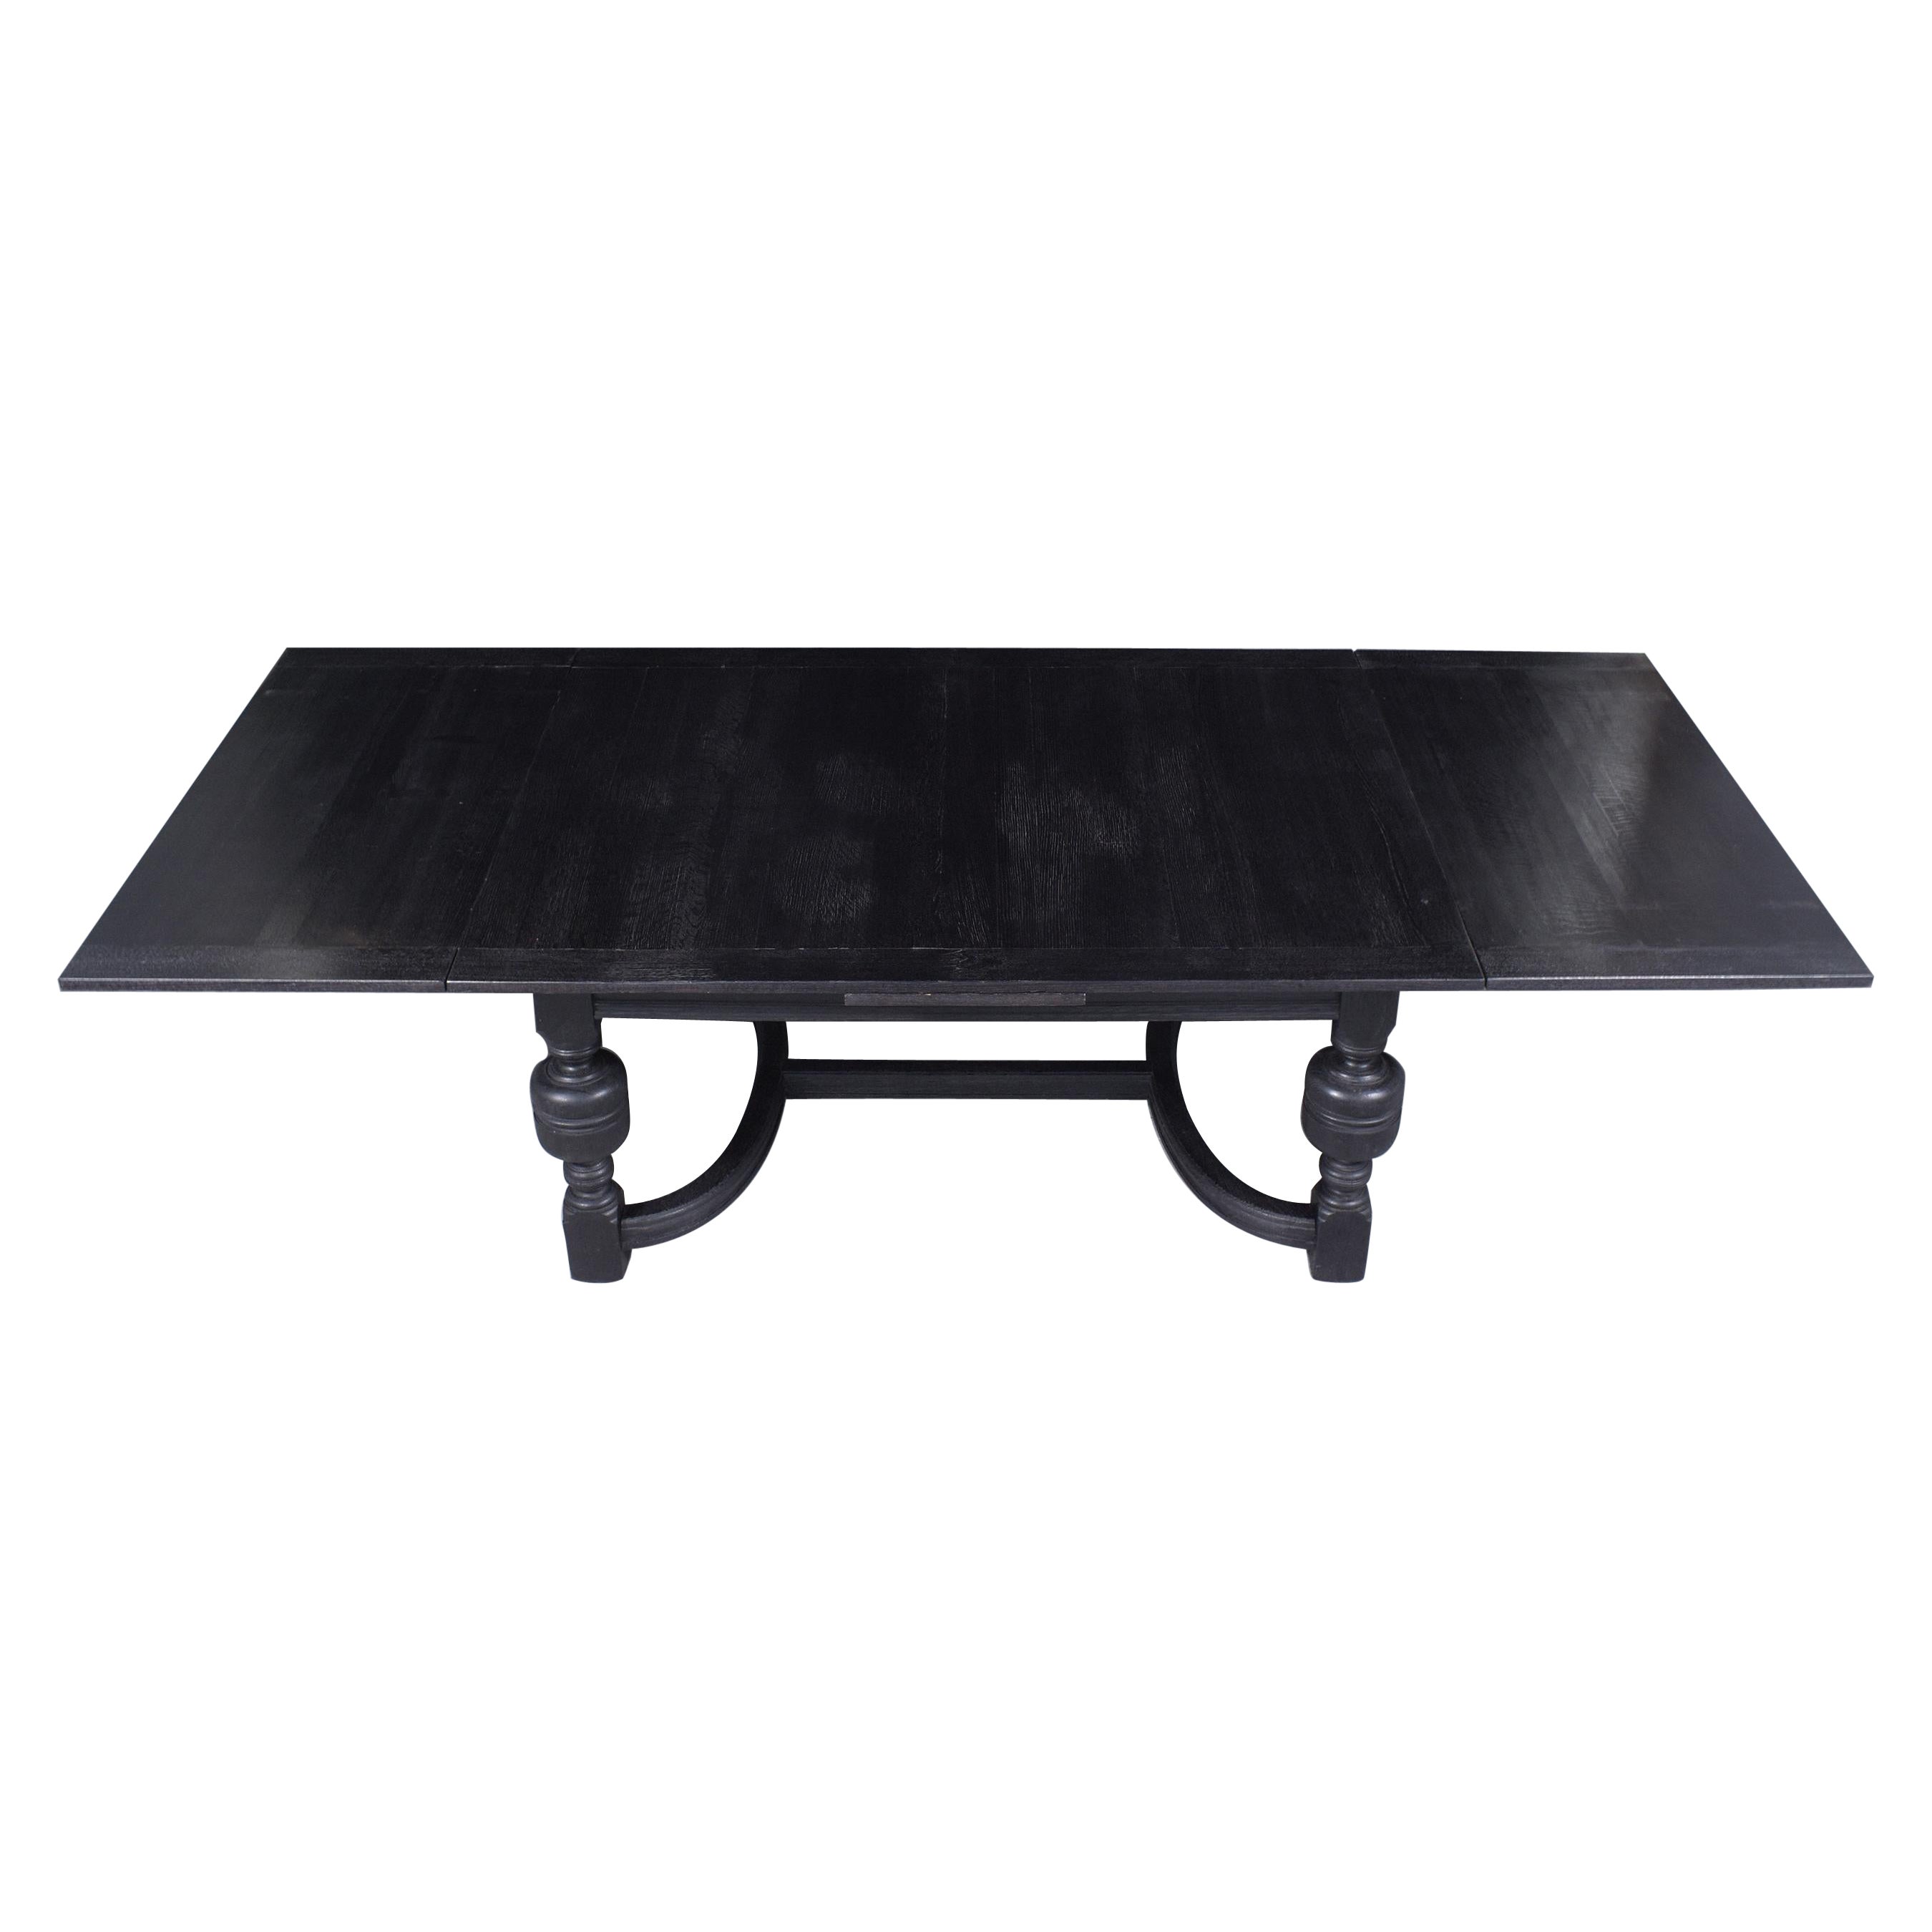 1850s Spanish Extendable Dining Table: Ebonized Solid Wood with French Design For Sale